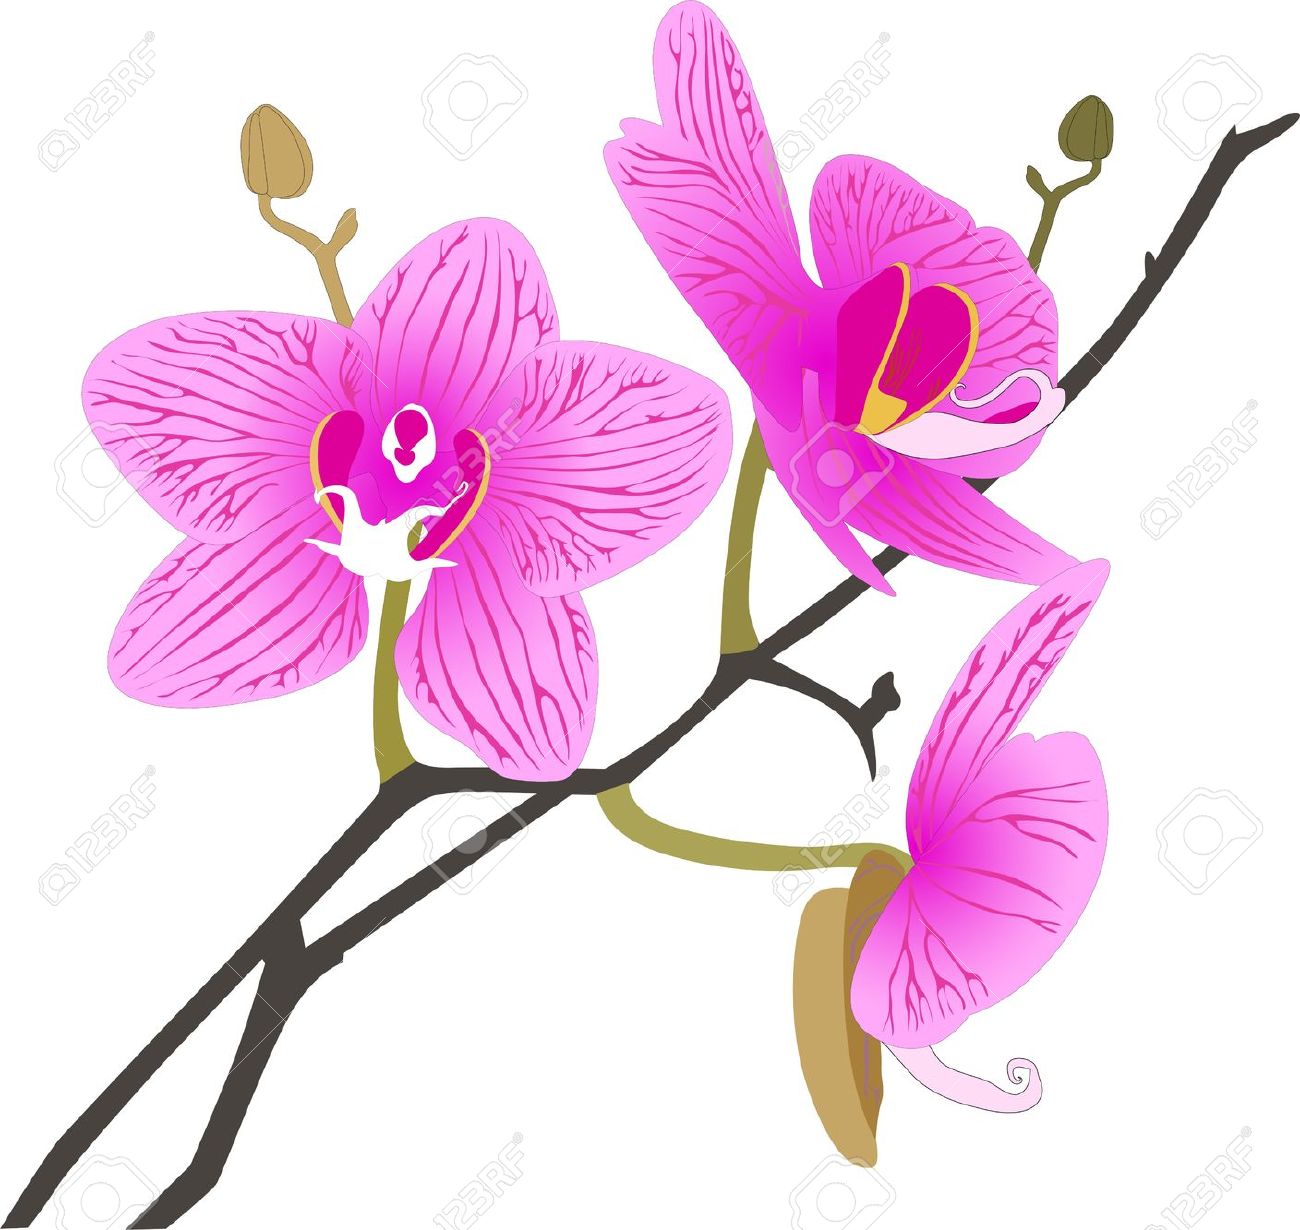 orchid flower clip art free - photo #29